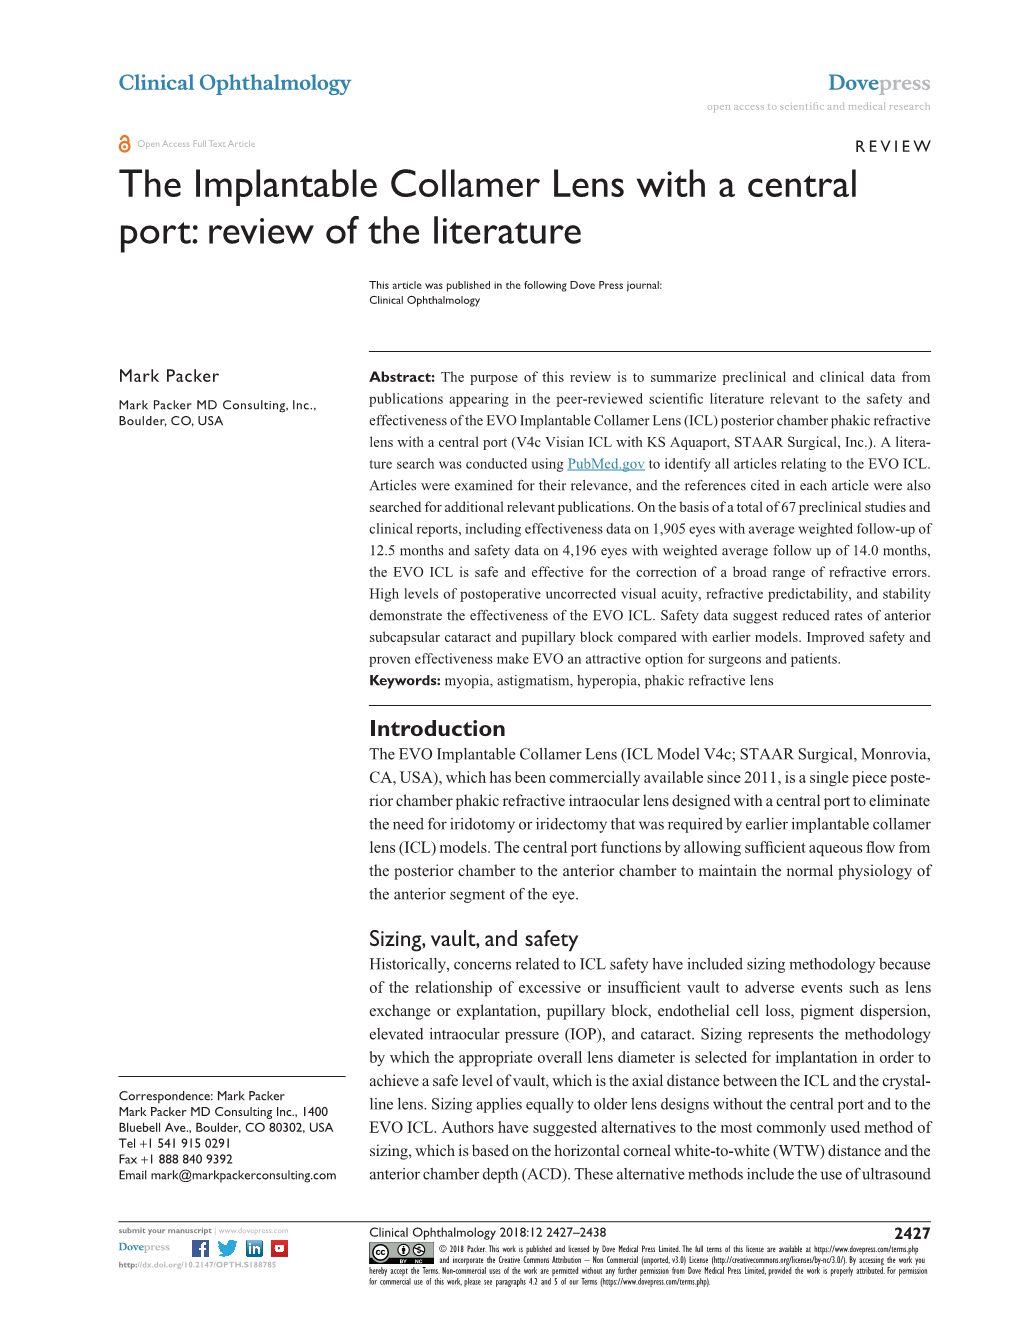 The Implantable Collamer Lens with a Central Port: Review of the Literature